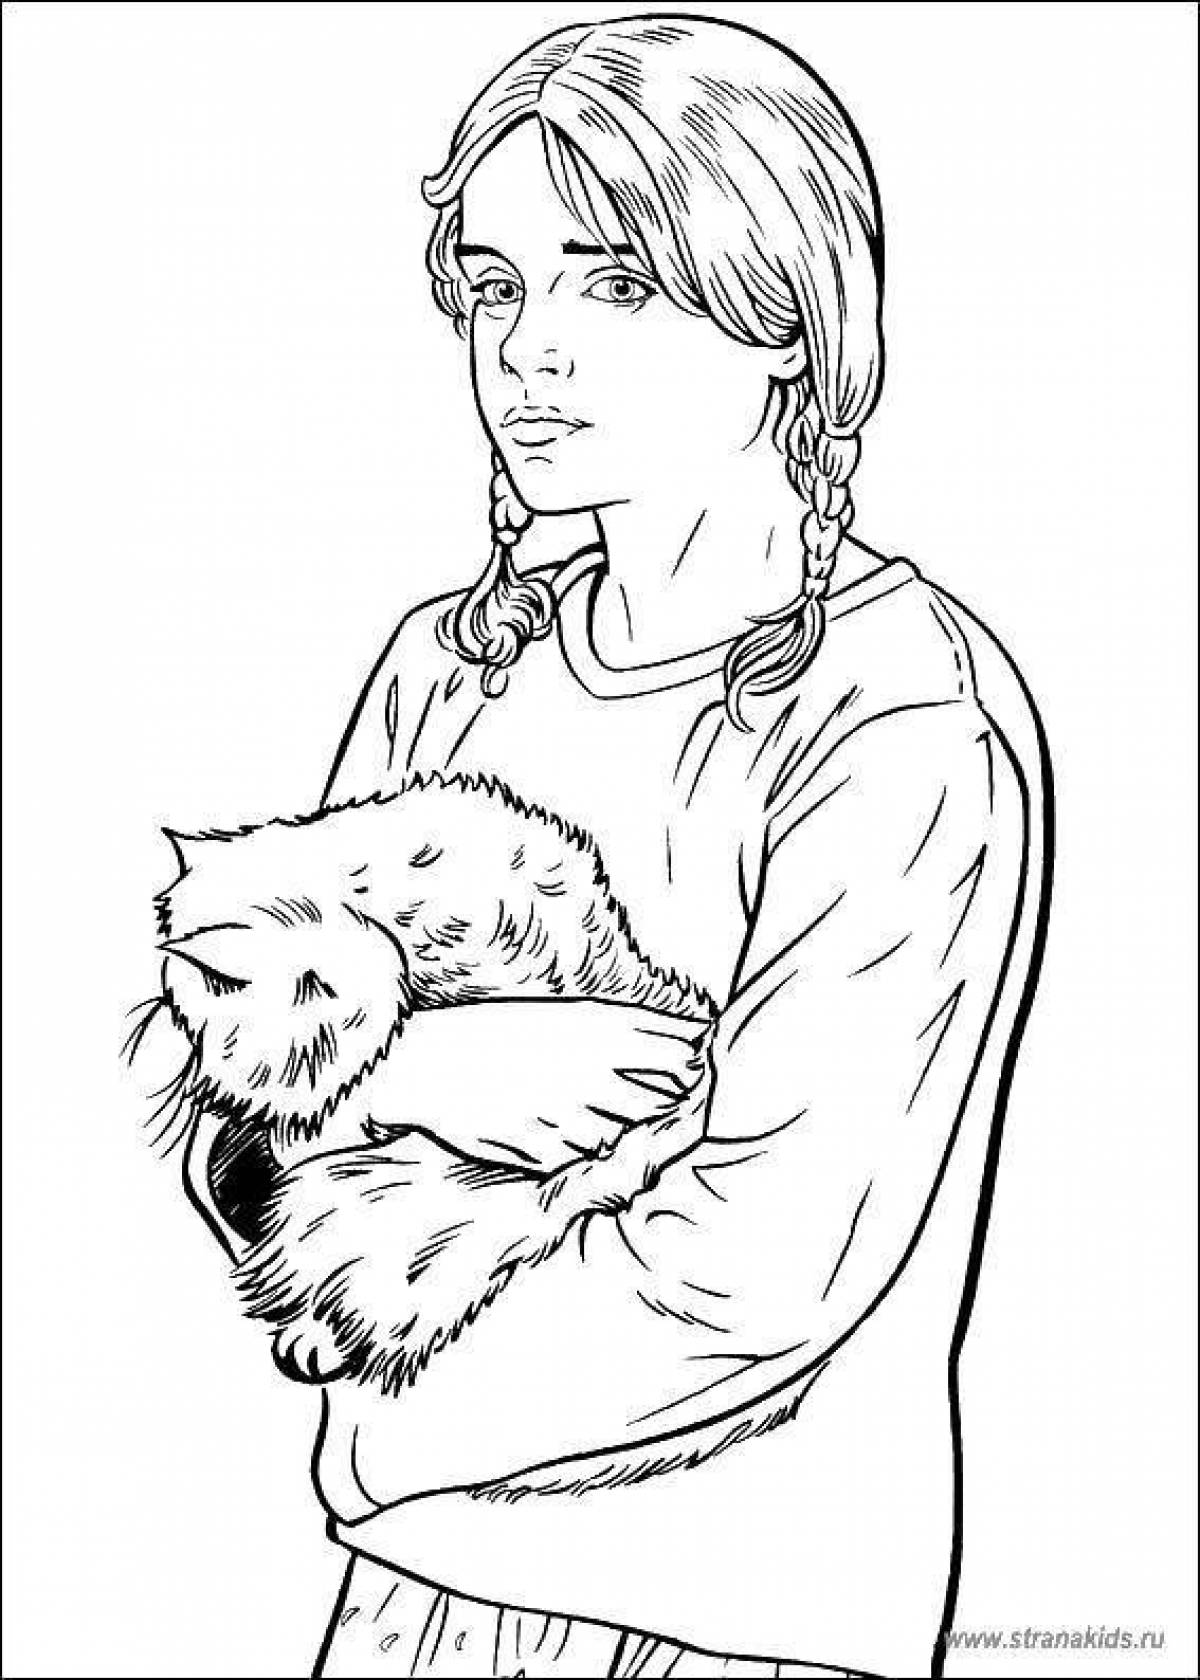 Hermione granger's lovely coloring page